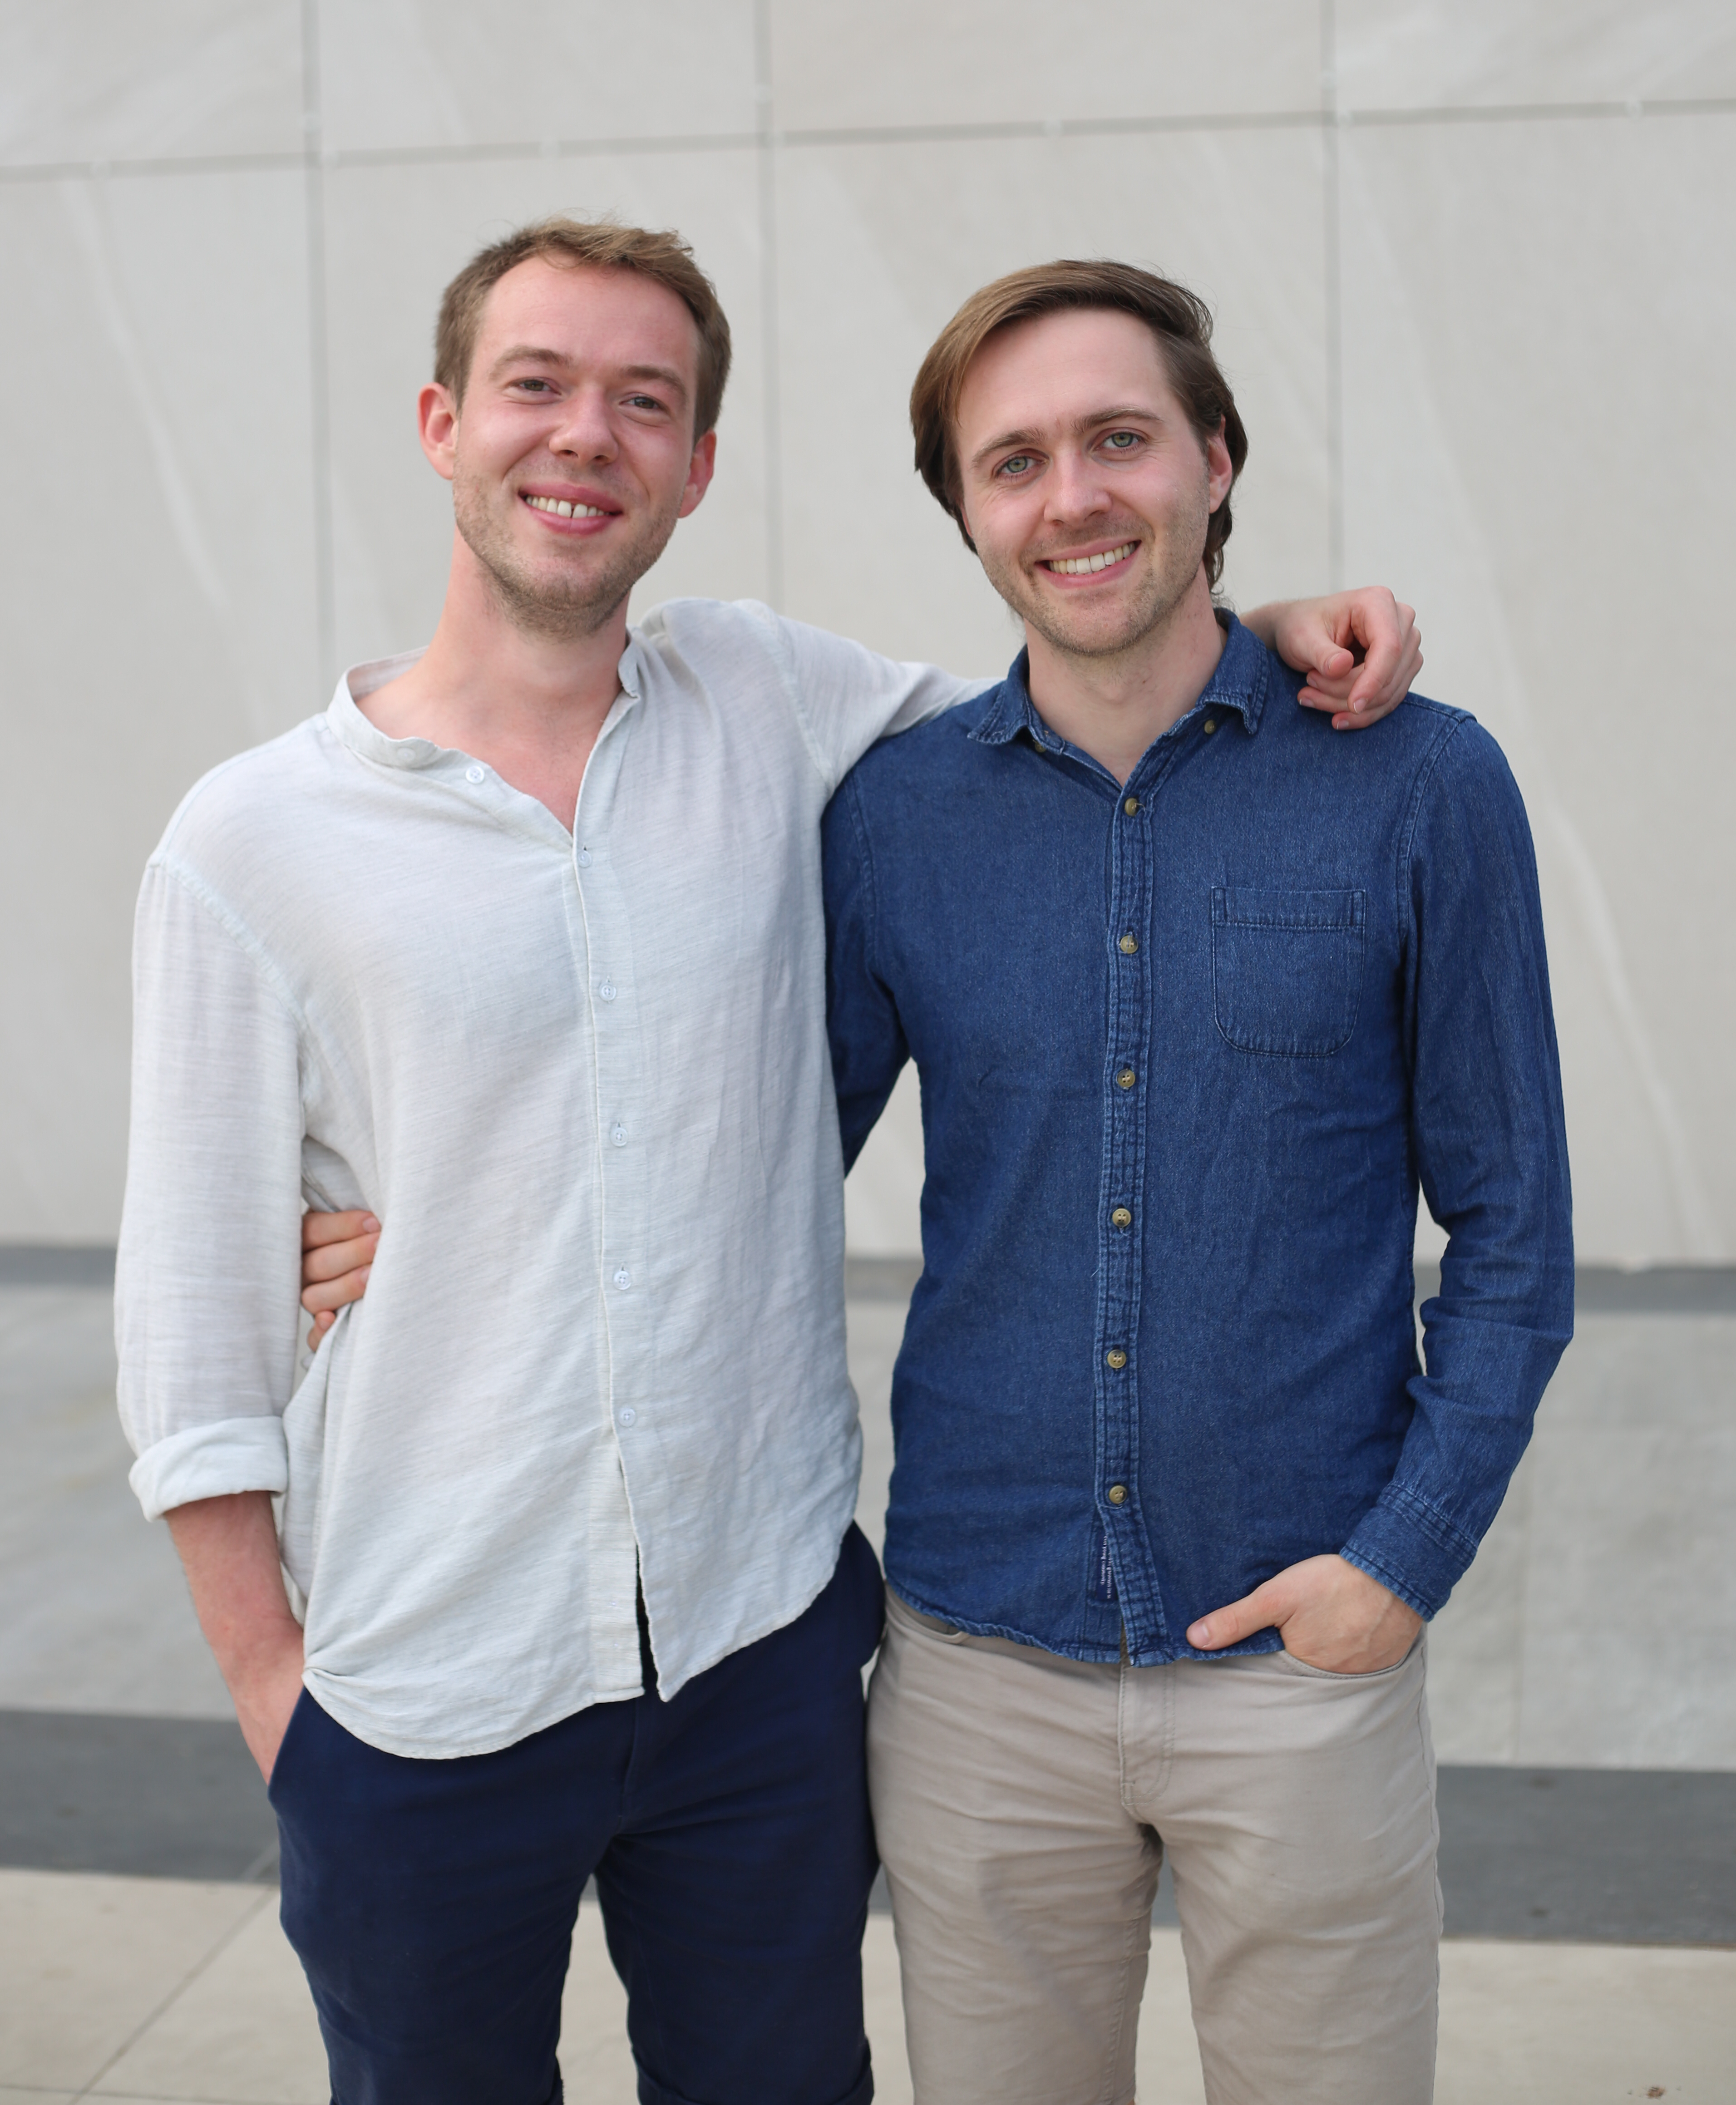 The founders of Actimi GmbH, two young men, stand in front of a building.